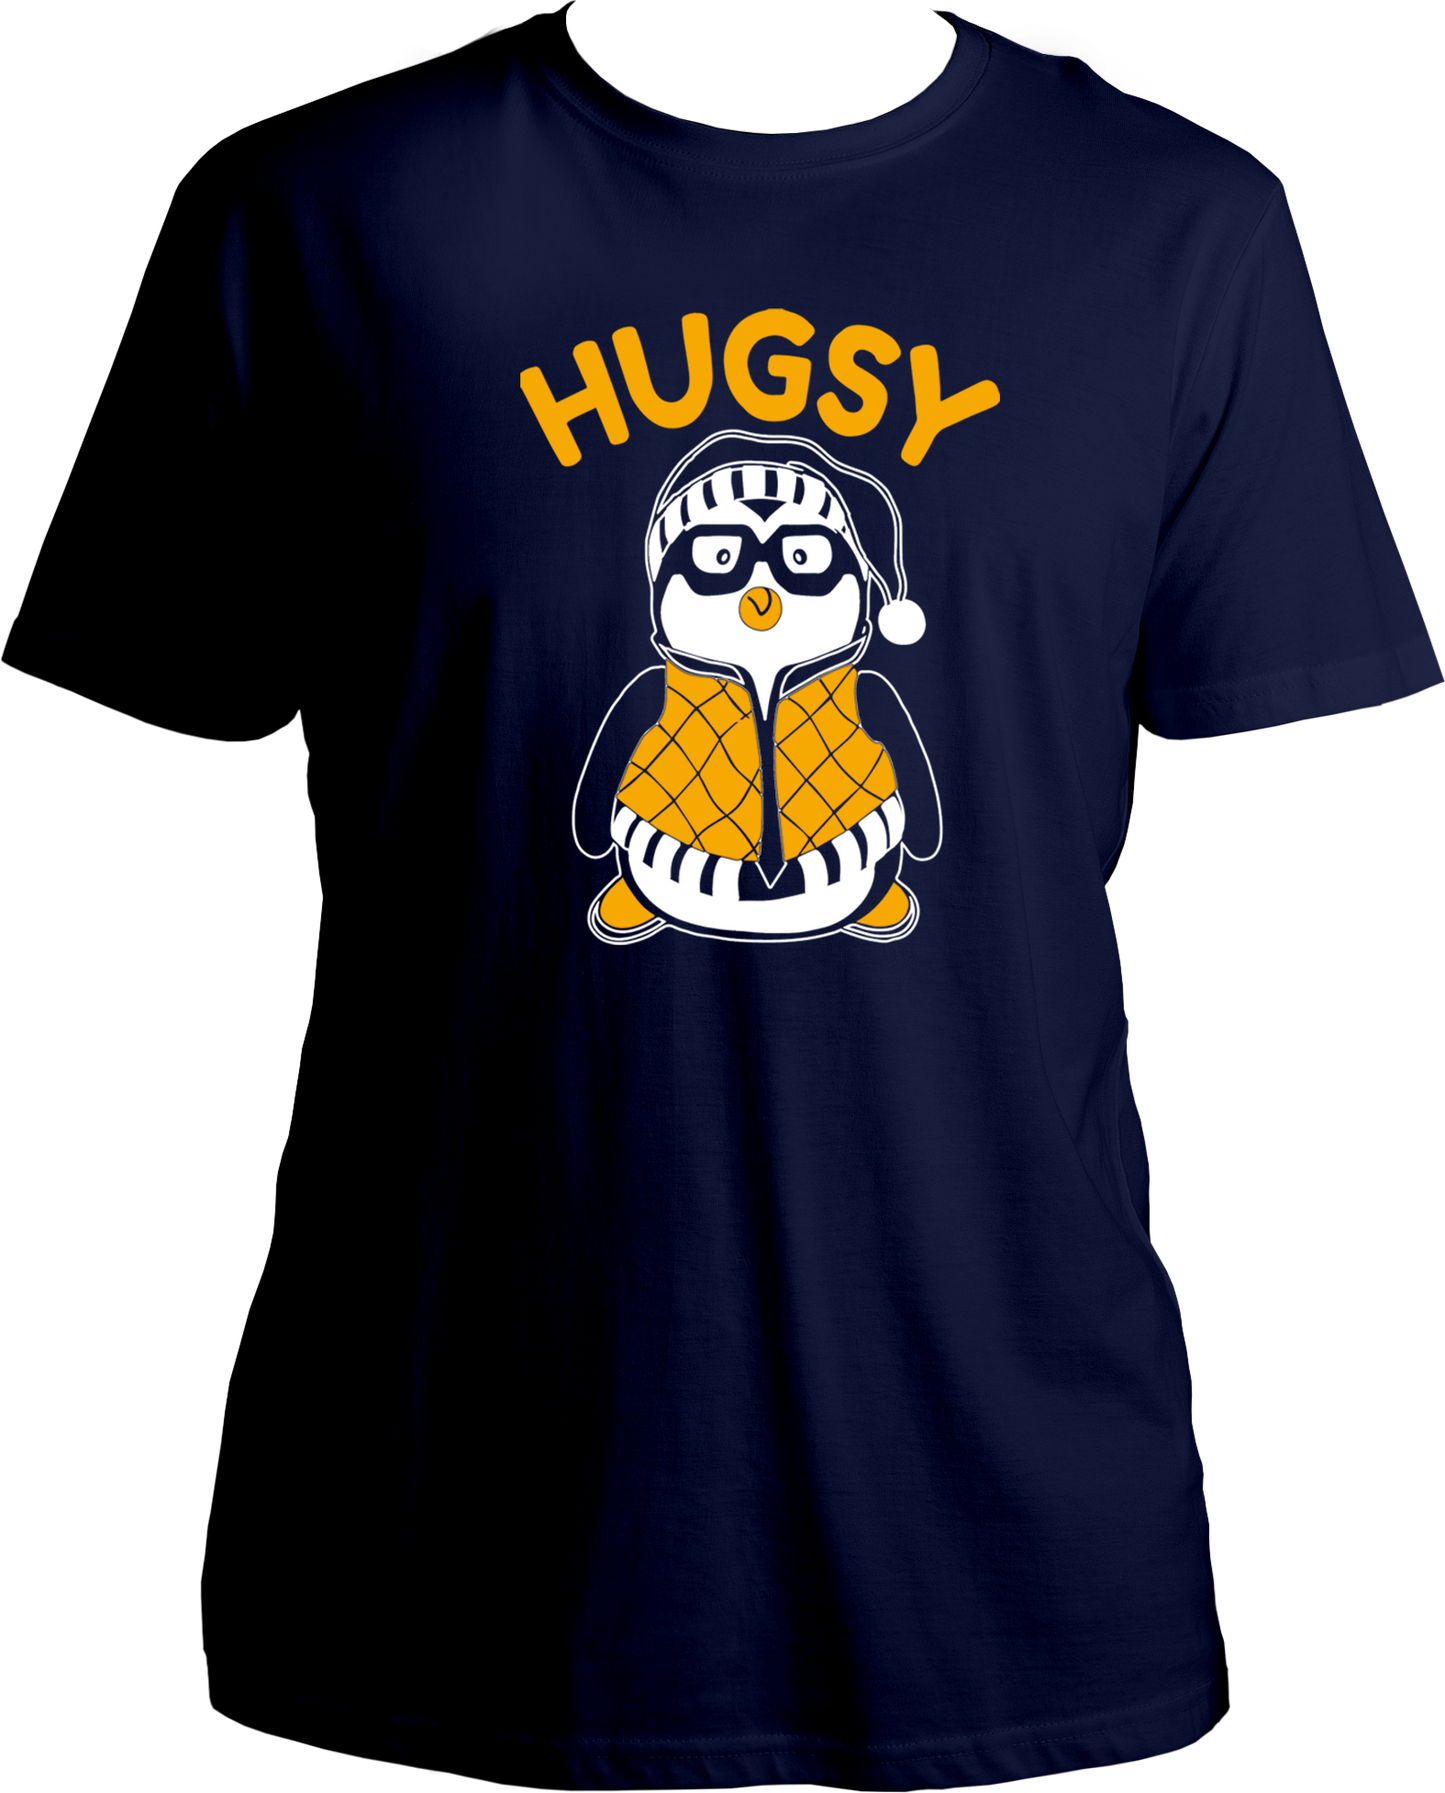 Step into the world of F.R.I.E.N.D.S with our Round Neck T-shirt featuring Joey's cherished companion - Hugsy the toy penguin! 🐧💙 Relive the hilarious moments as Joey's love for Hugsy unfolds on this tee, capturing the essence of their unforgettable friendship. Wear it proudly and let your fandom shine! 📺✨ #FriendsForever #JoeyAndHugsy #ClassicTVFashion